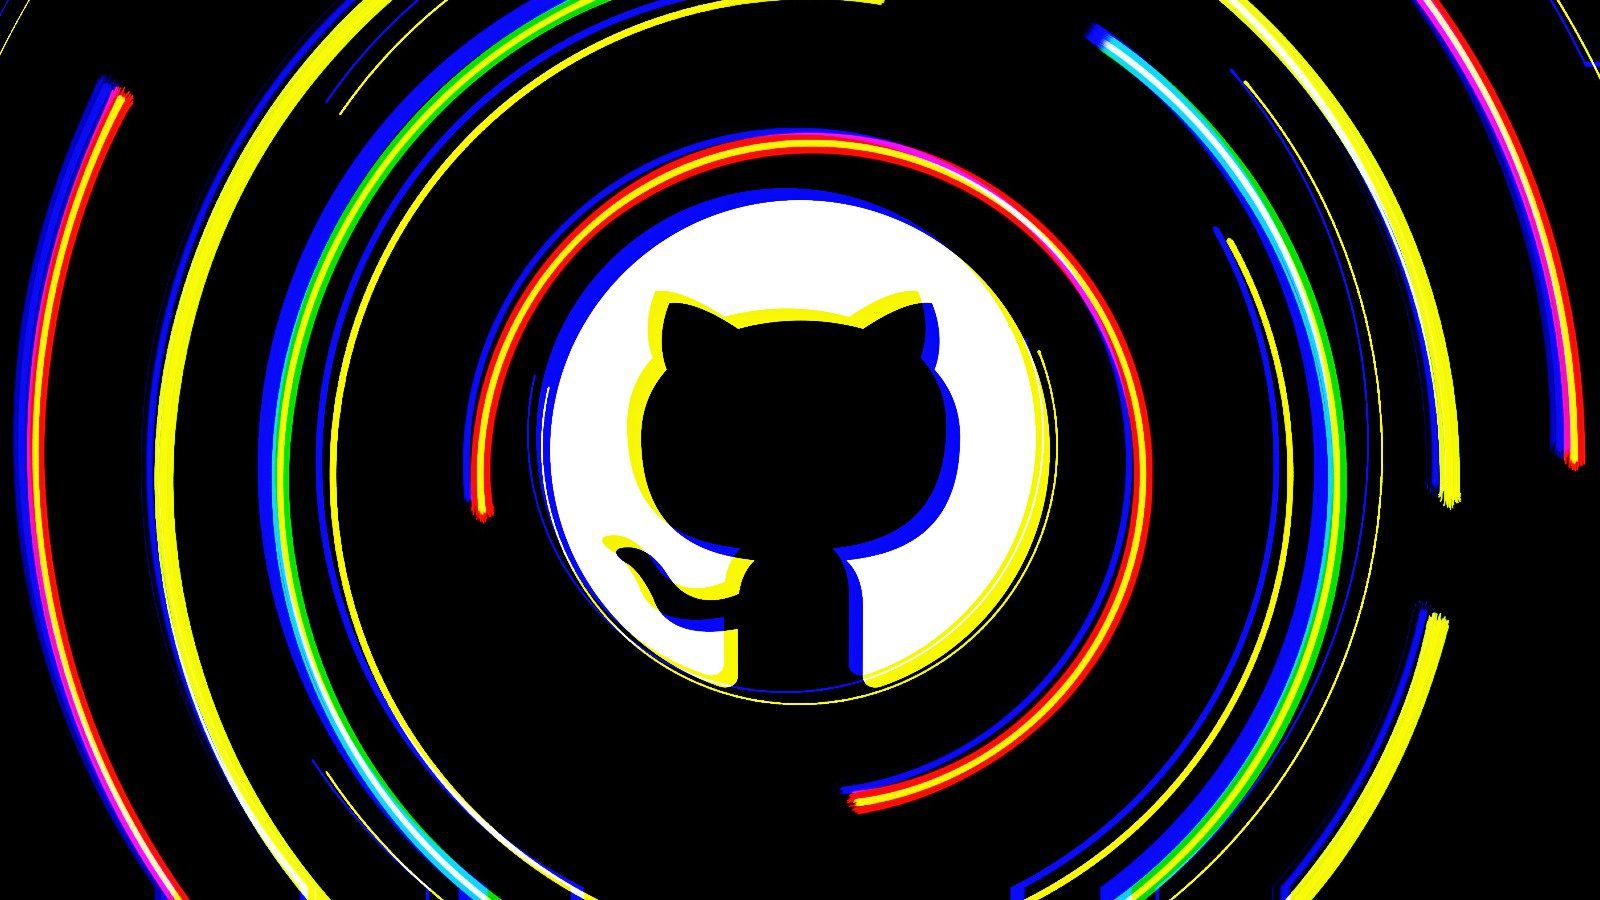 GitHub reveals reason behind last week’s string of outages – Source: www.bleepingcomputer.com